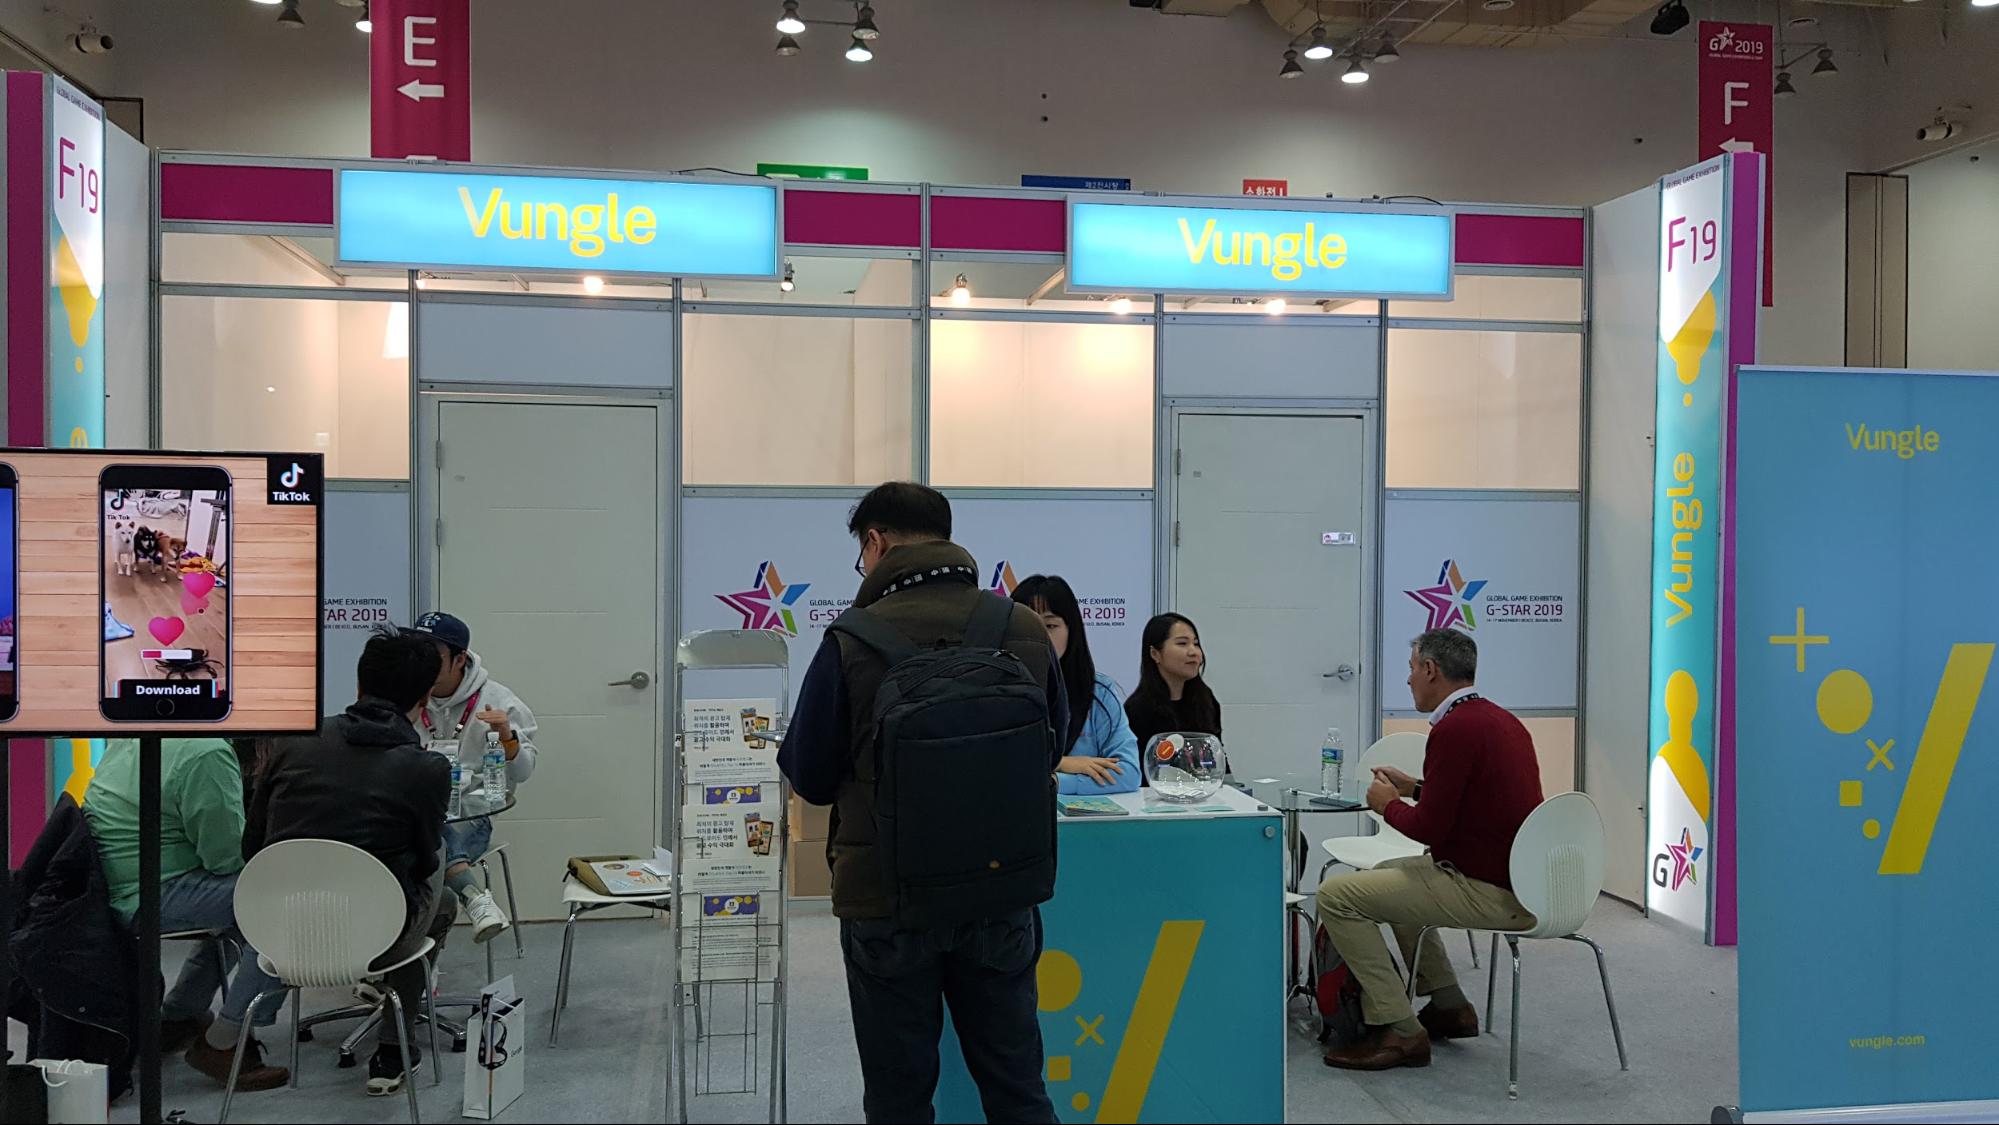 Vungle's booth at G-STAR 2019